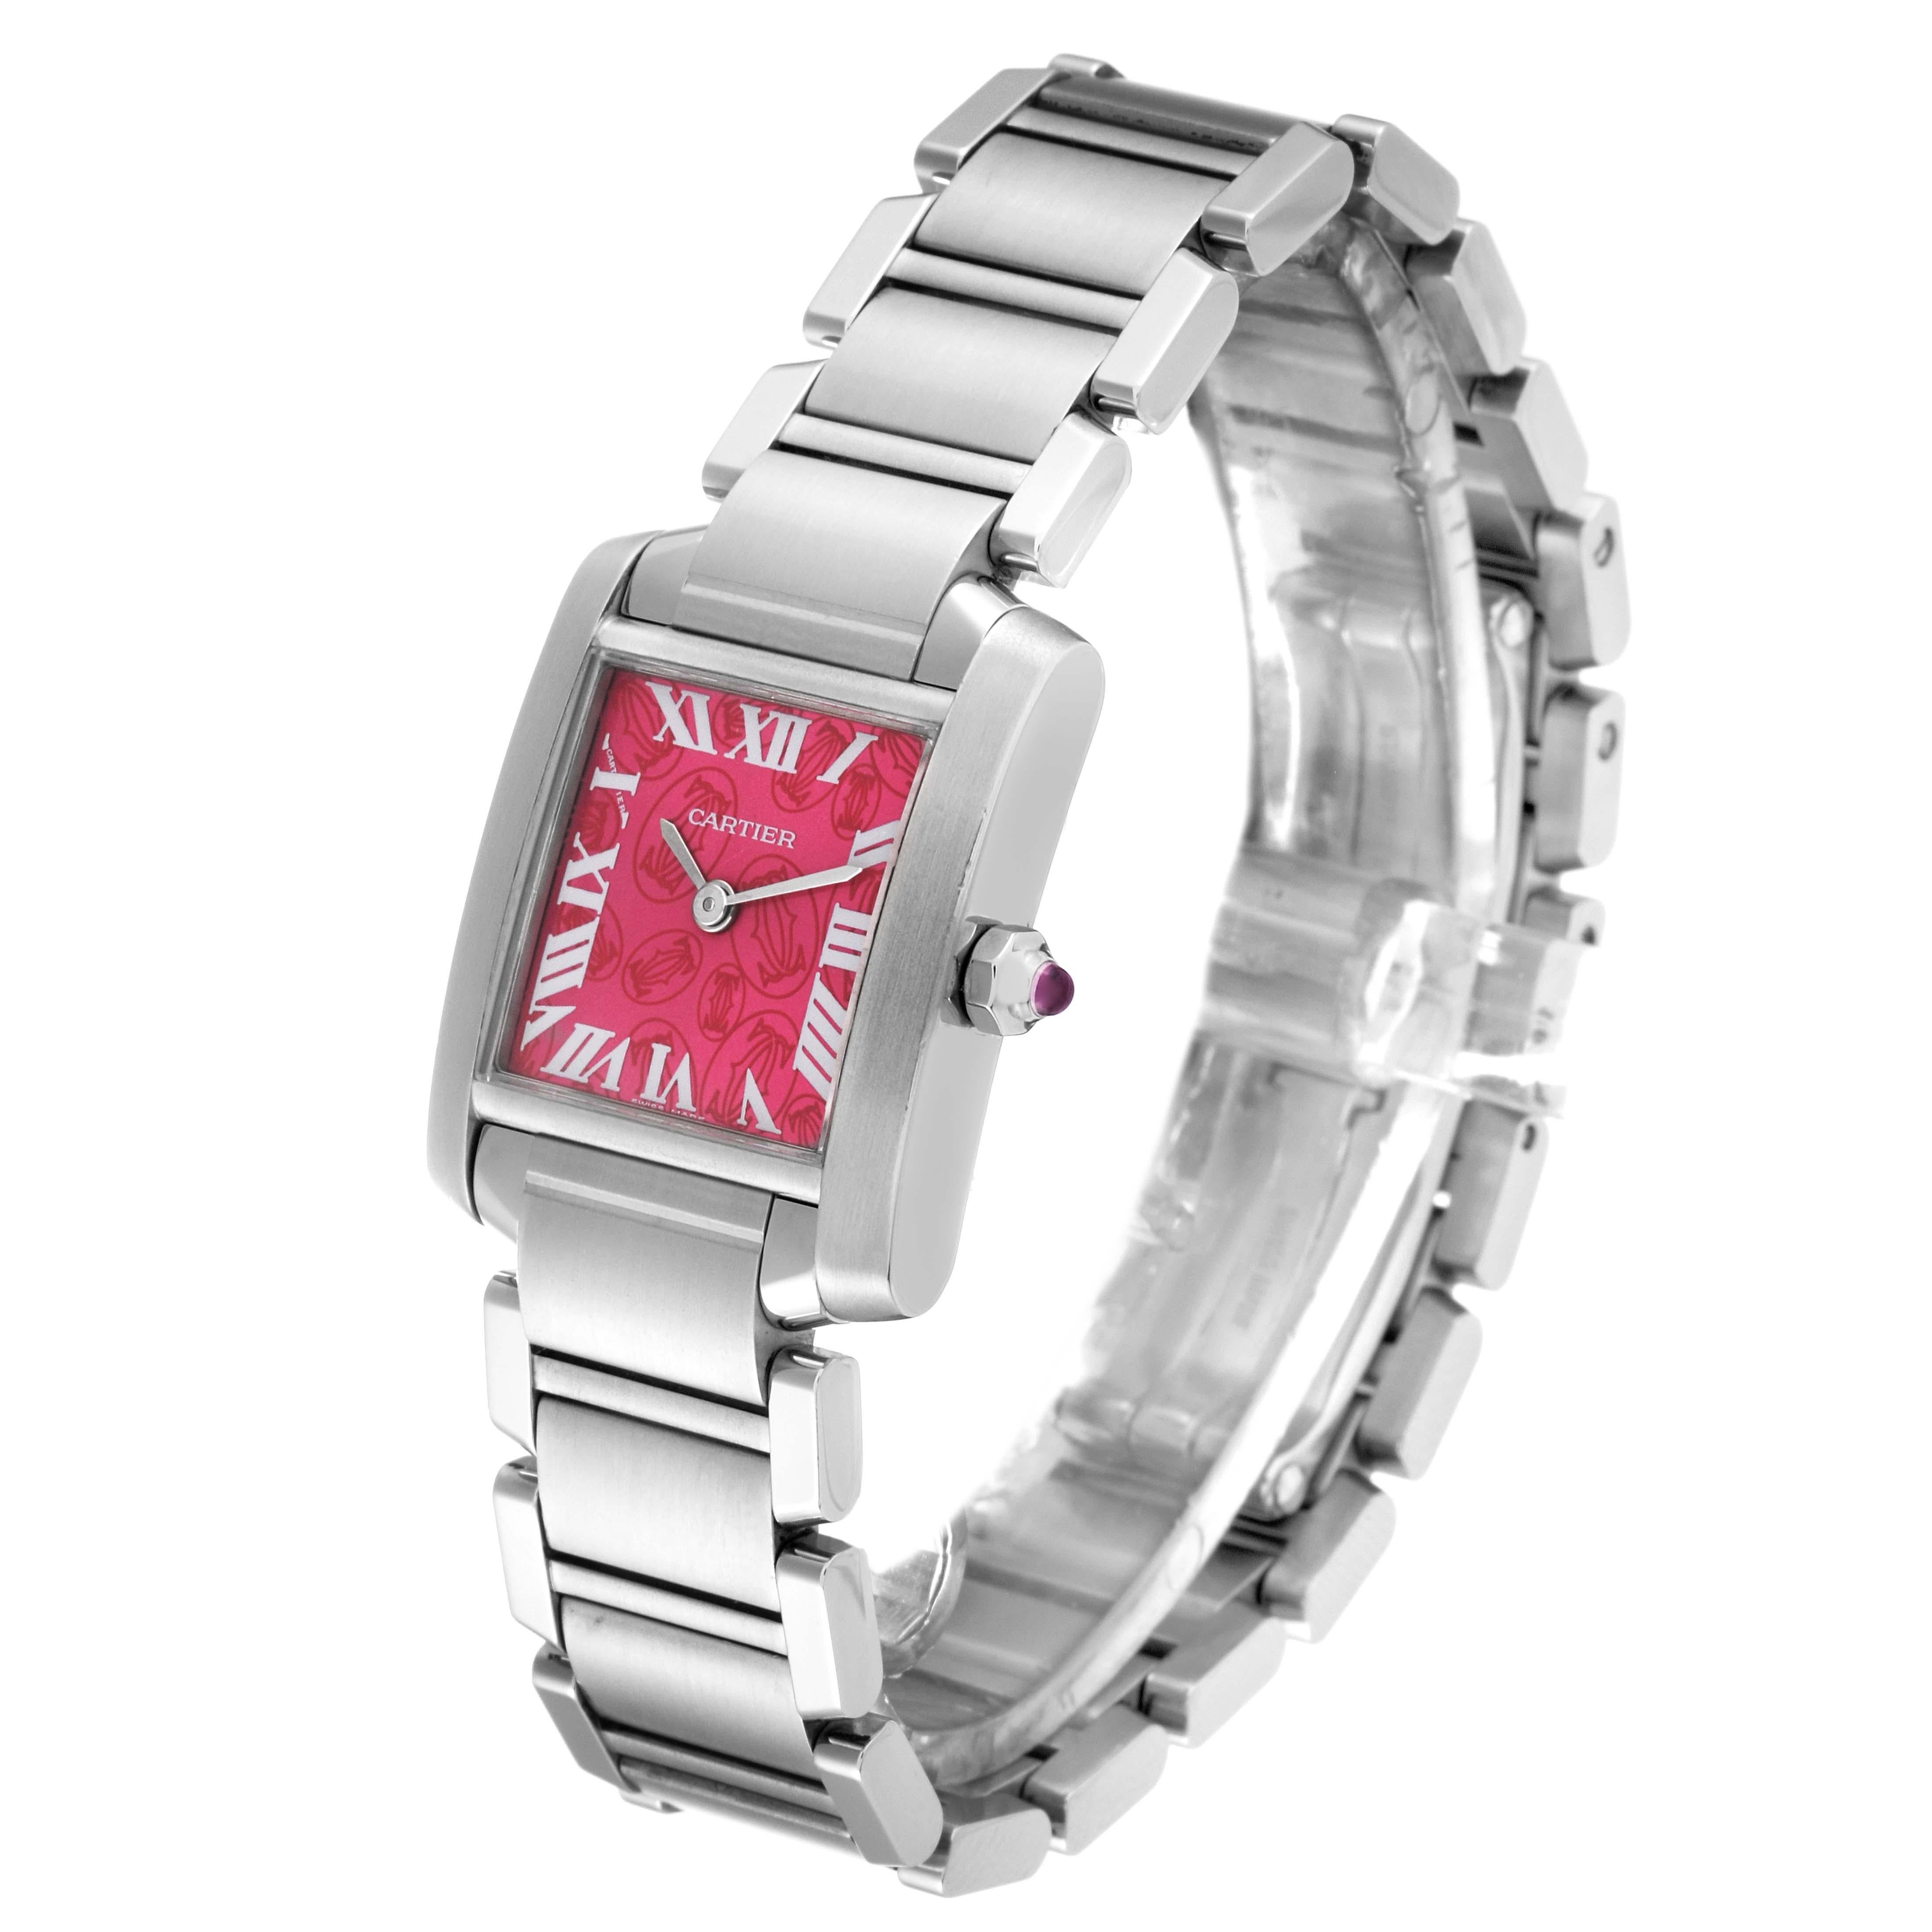 Cartier Tank Francaise Raspberry Dial Limited Edition Steel Watch W51030Q3 For Sale 4